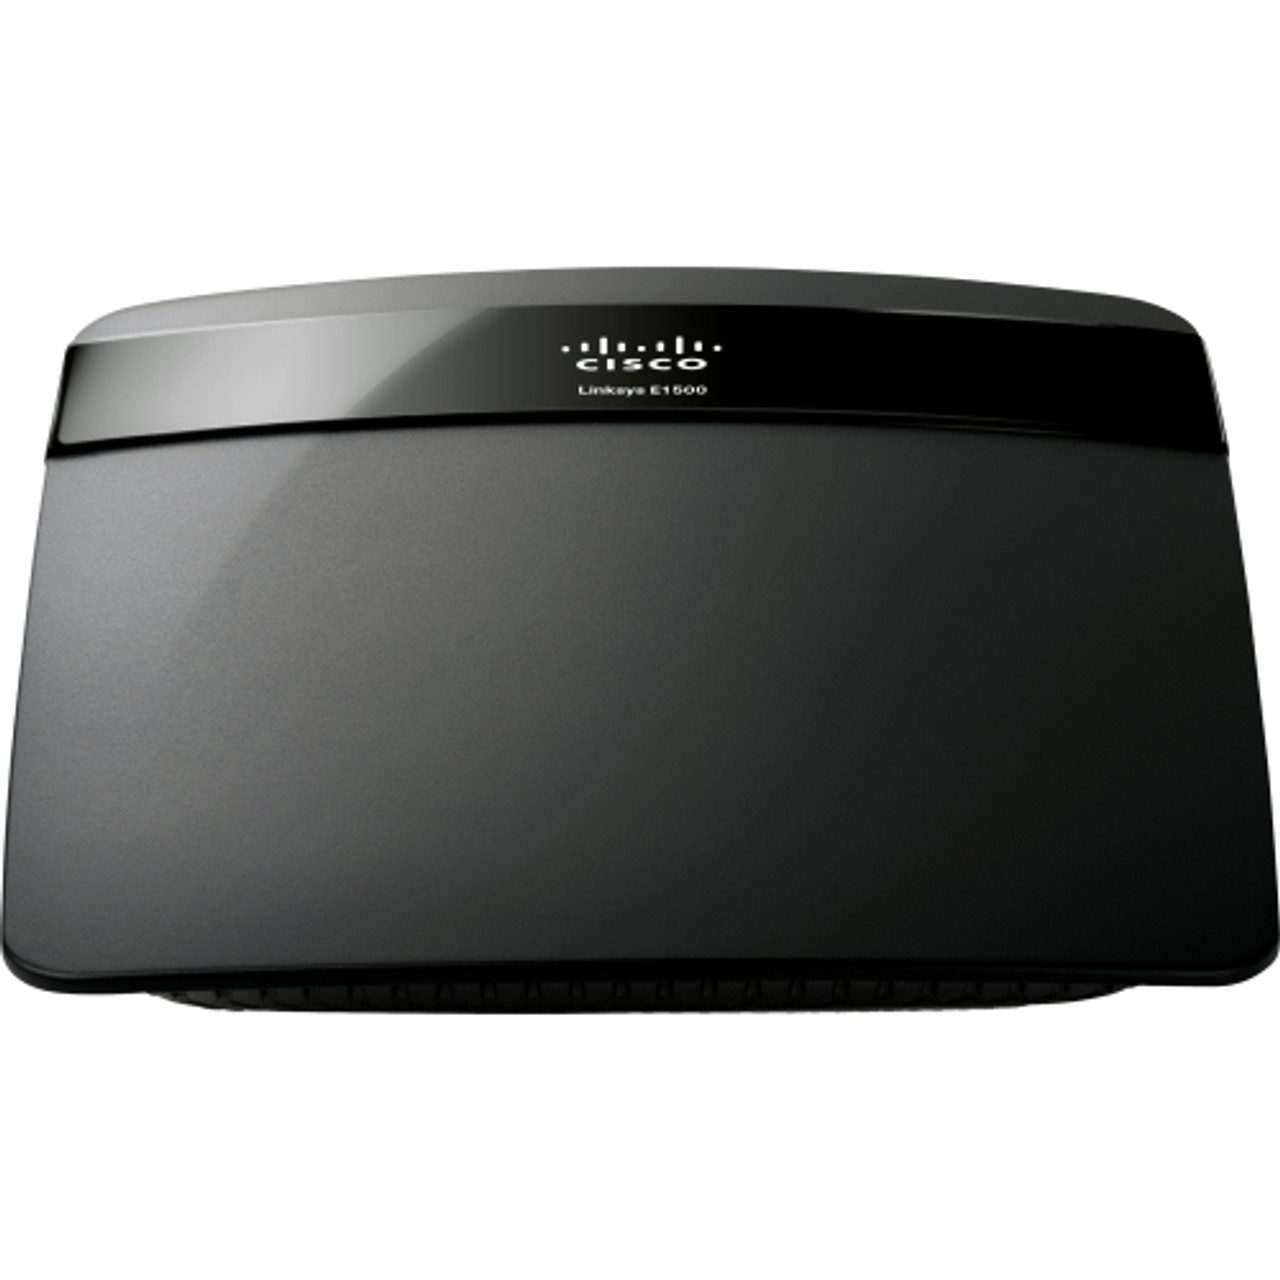 E1500-AR Linksys E1500 IEEE 802.11n Wireless Router (Refurbished)